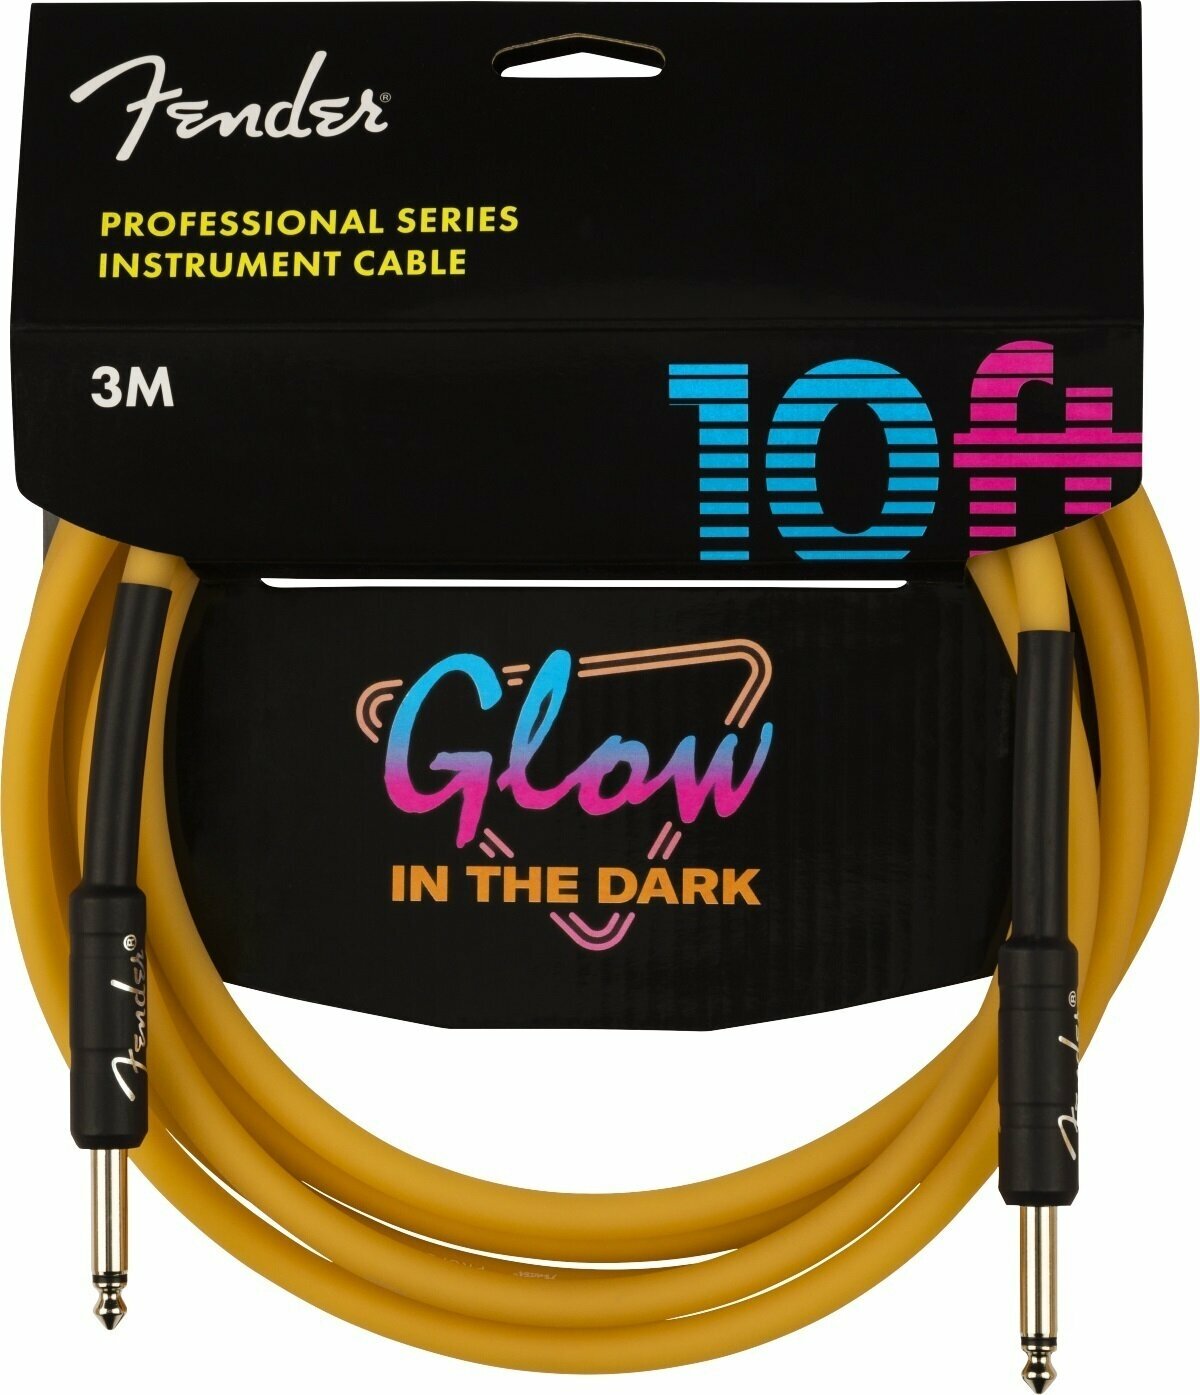 Instrument Cable Fender Professional Glow in the Dark Orange 3 m Straight - Straight